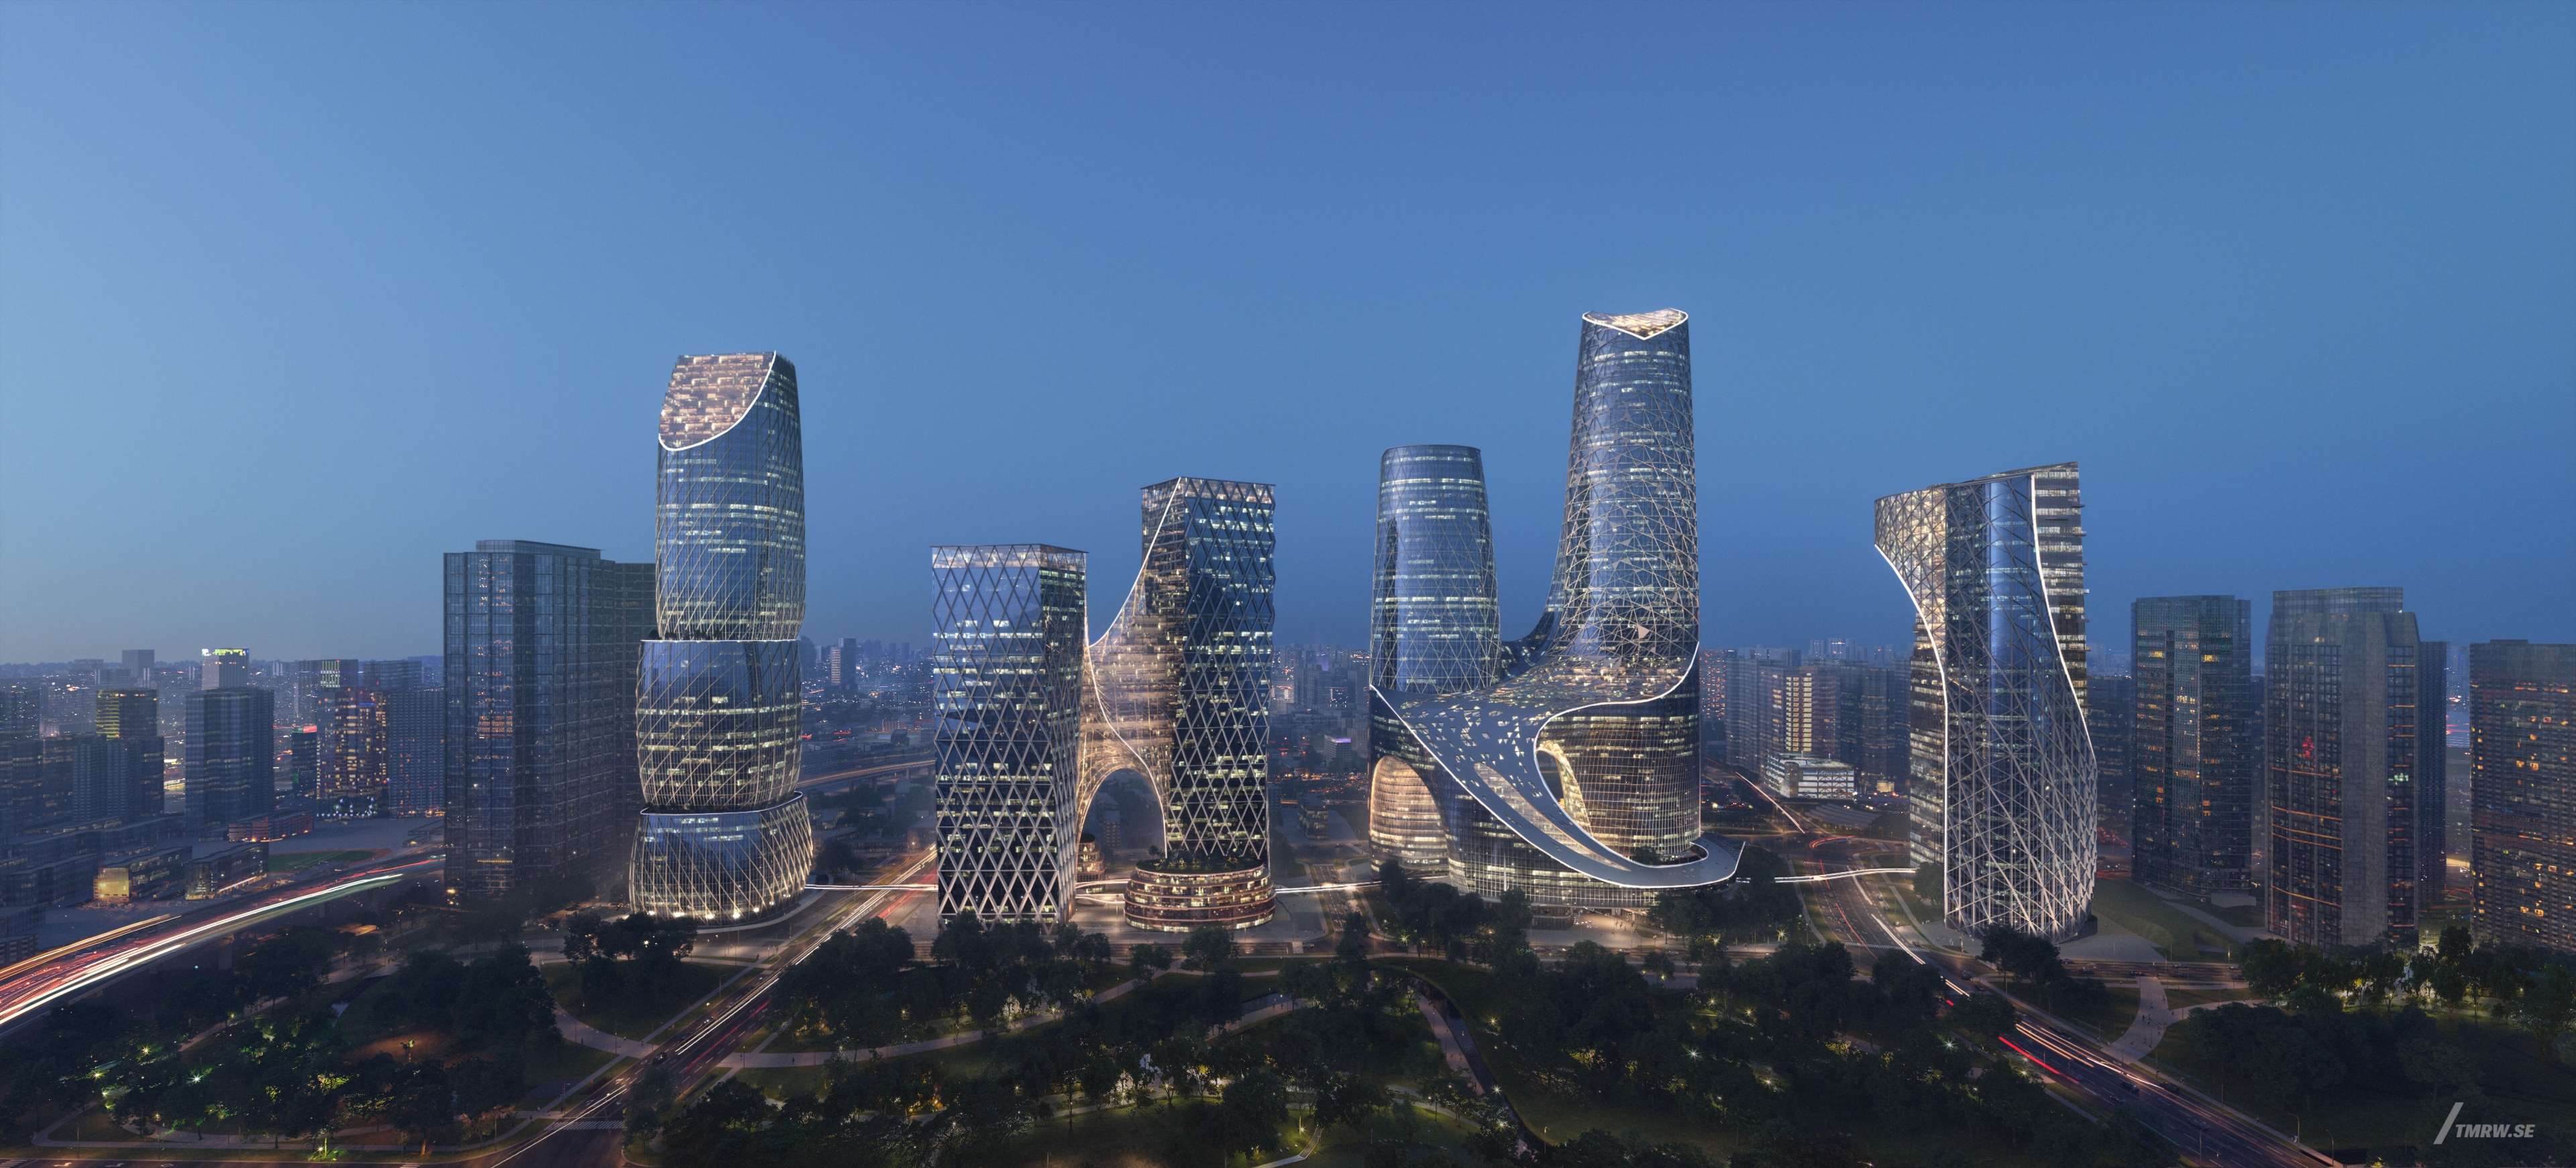 Architectural visualization of Wuhan for NBBJ. An image of the exterior of four skyscraper buildings with glass facade at night from semi aerial view.